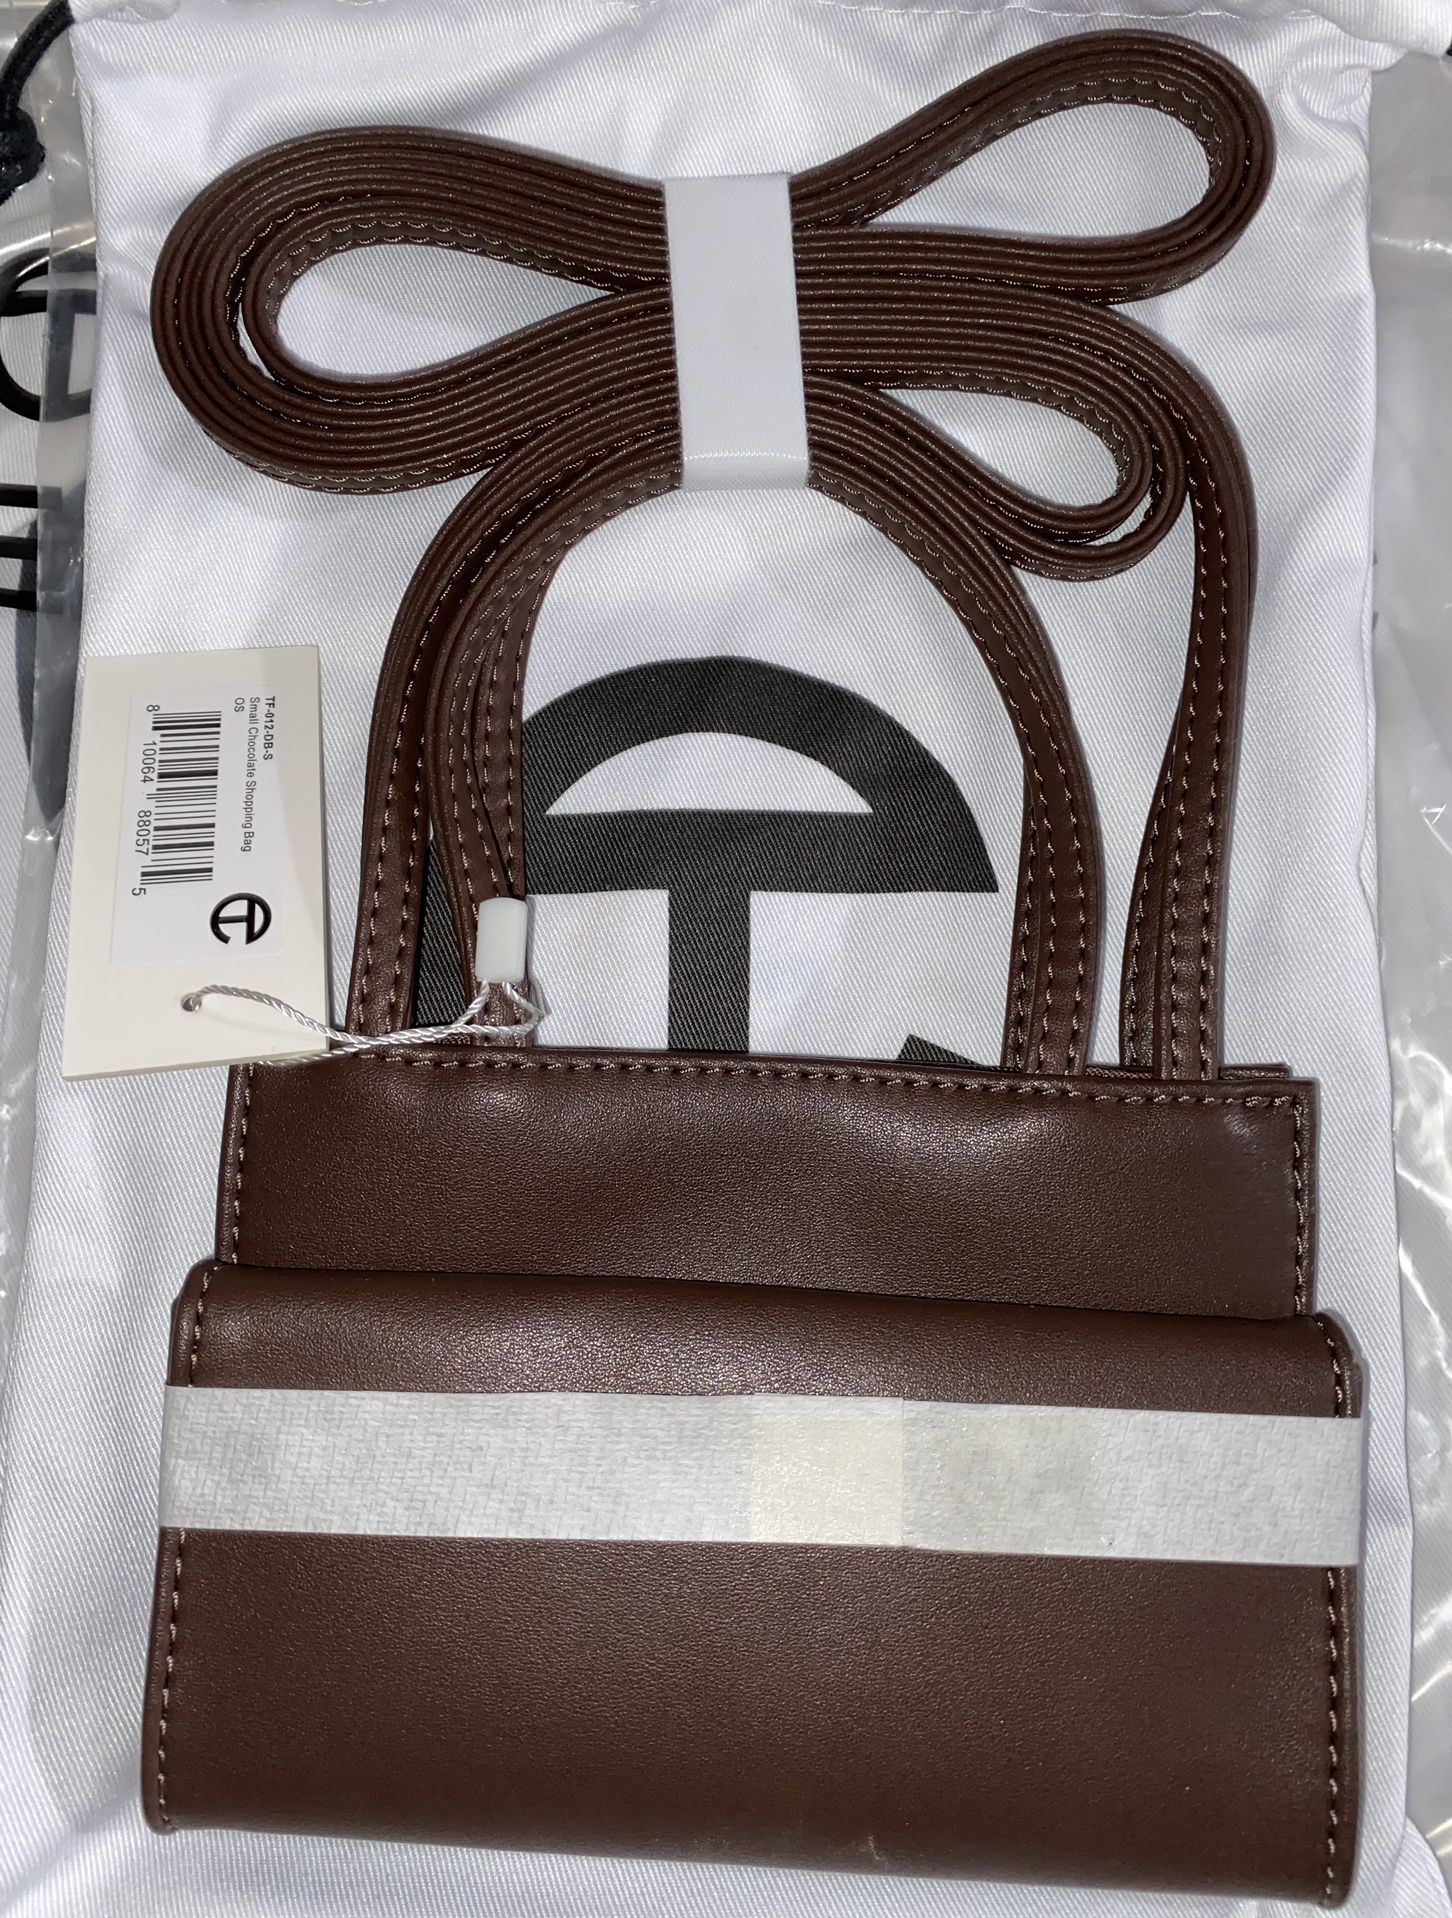 Telfar Black Patent Shopping Bag Small Brand New for Sale in The Bronx, NY  - OfferUp